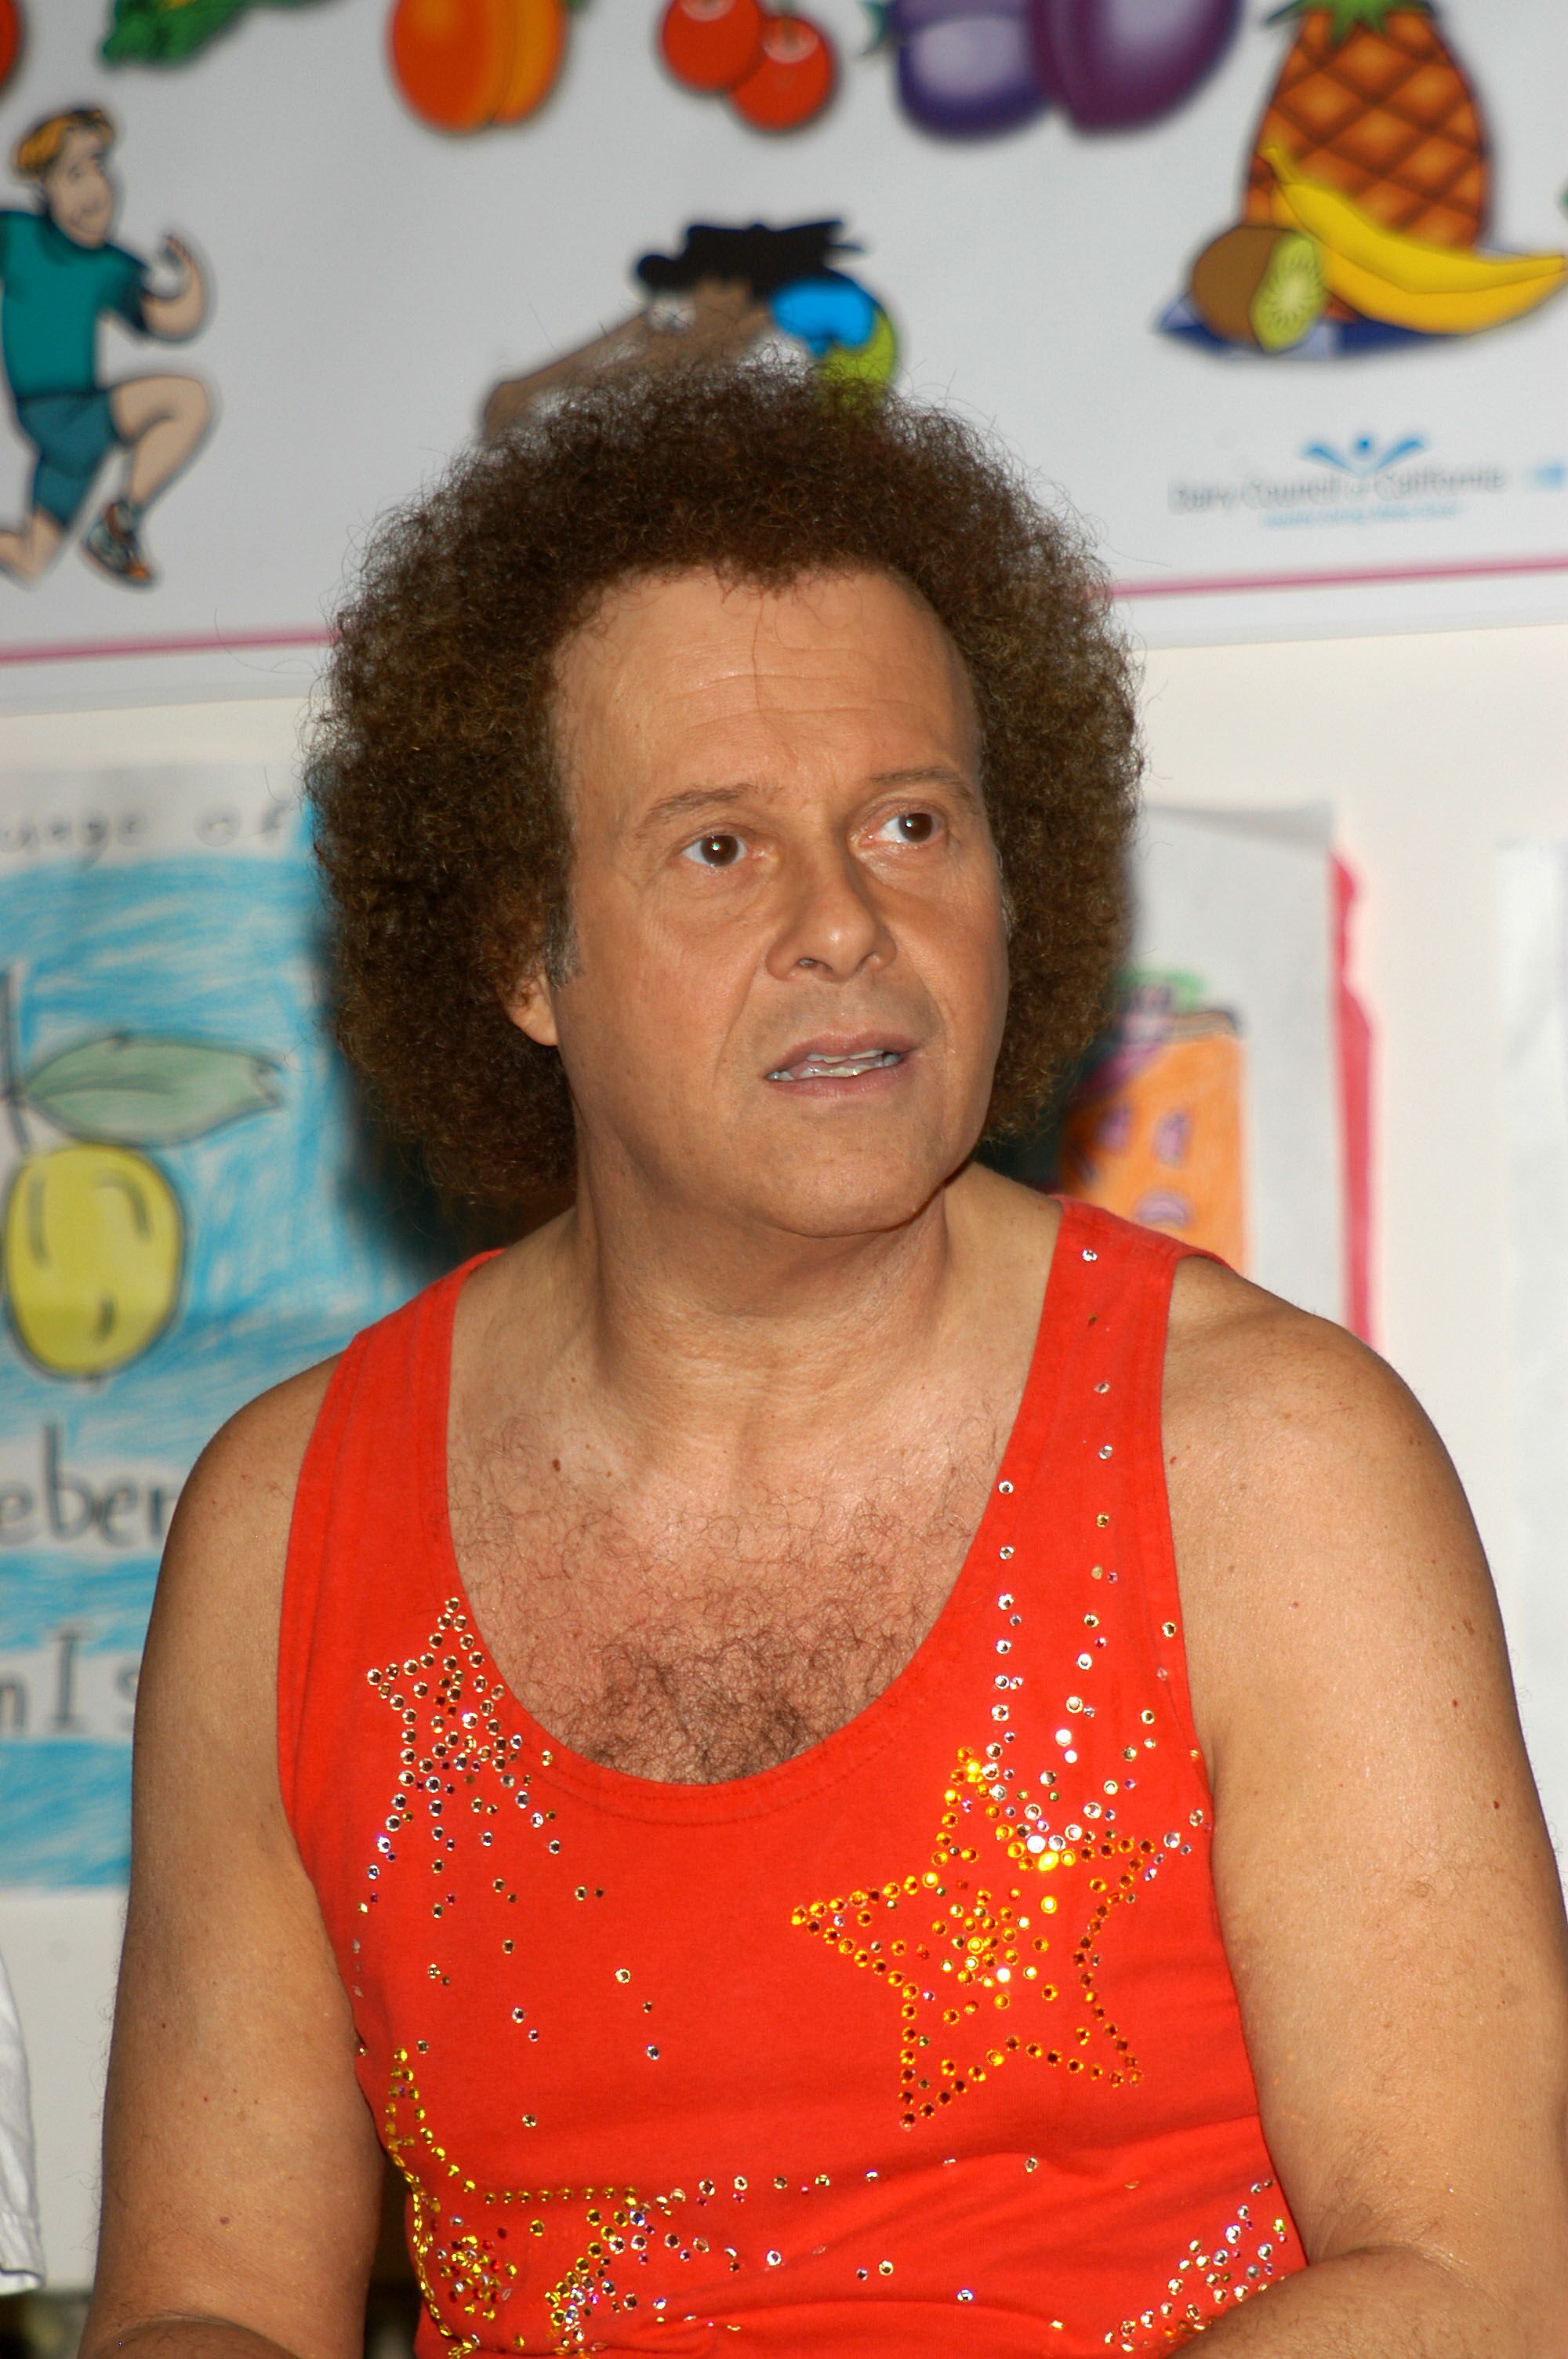 Richard Simmons speaks to students about exercise and nutrition at the Third Annual Nutrition Advisory Council Symposium. | Source: Getty Images